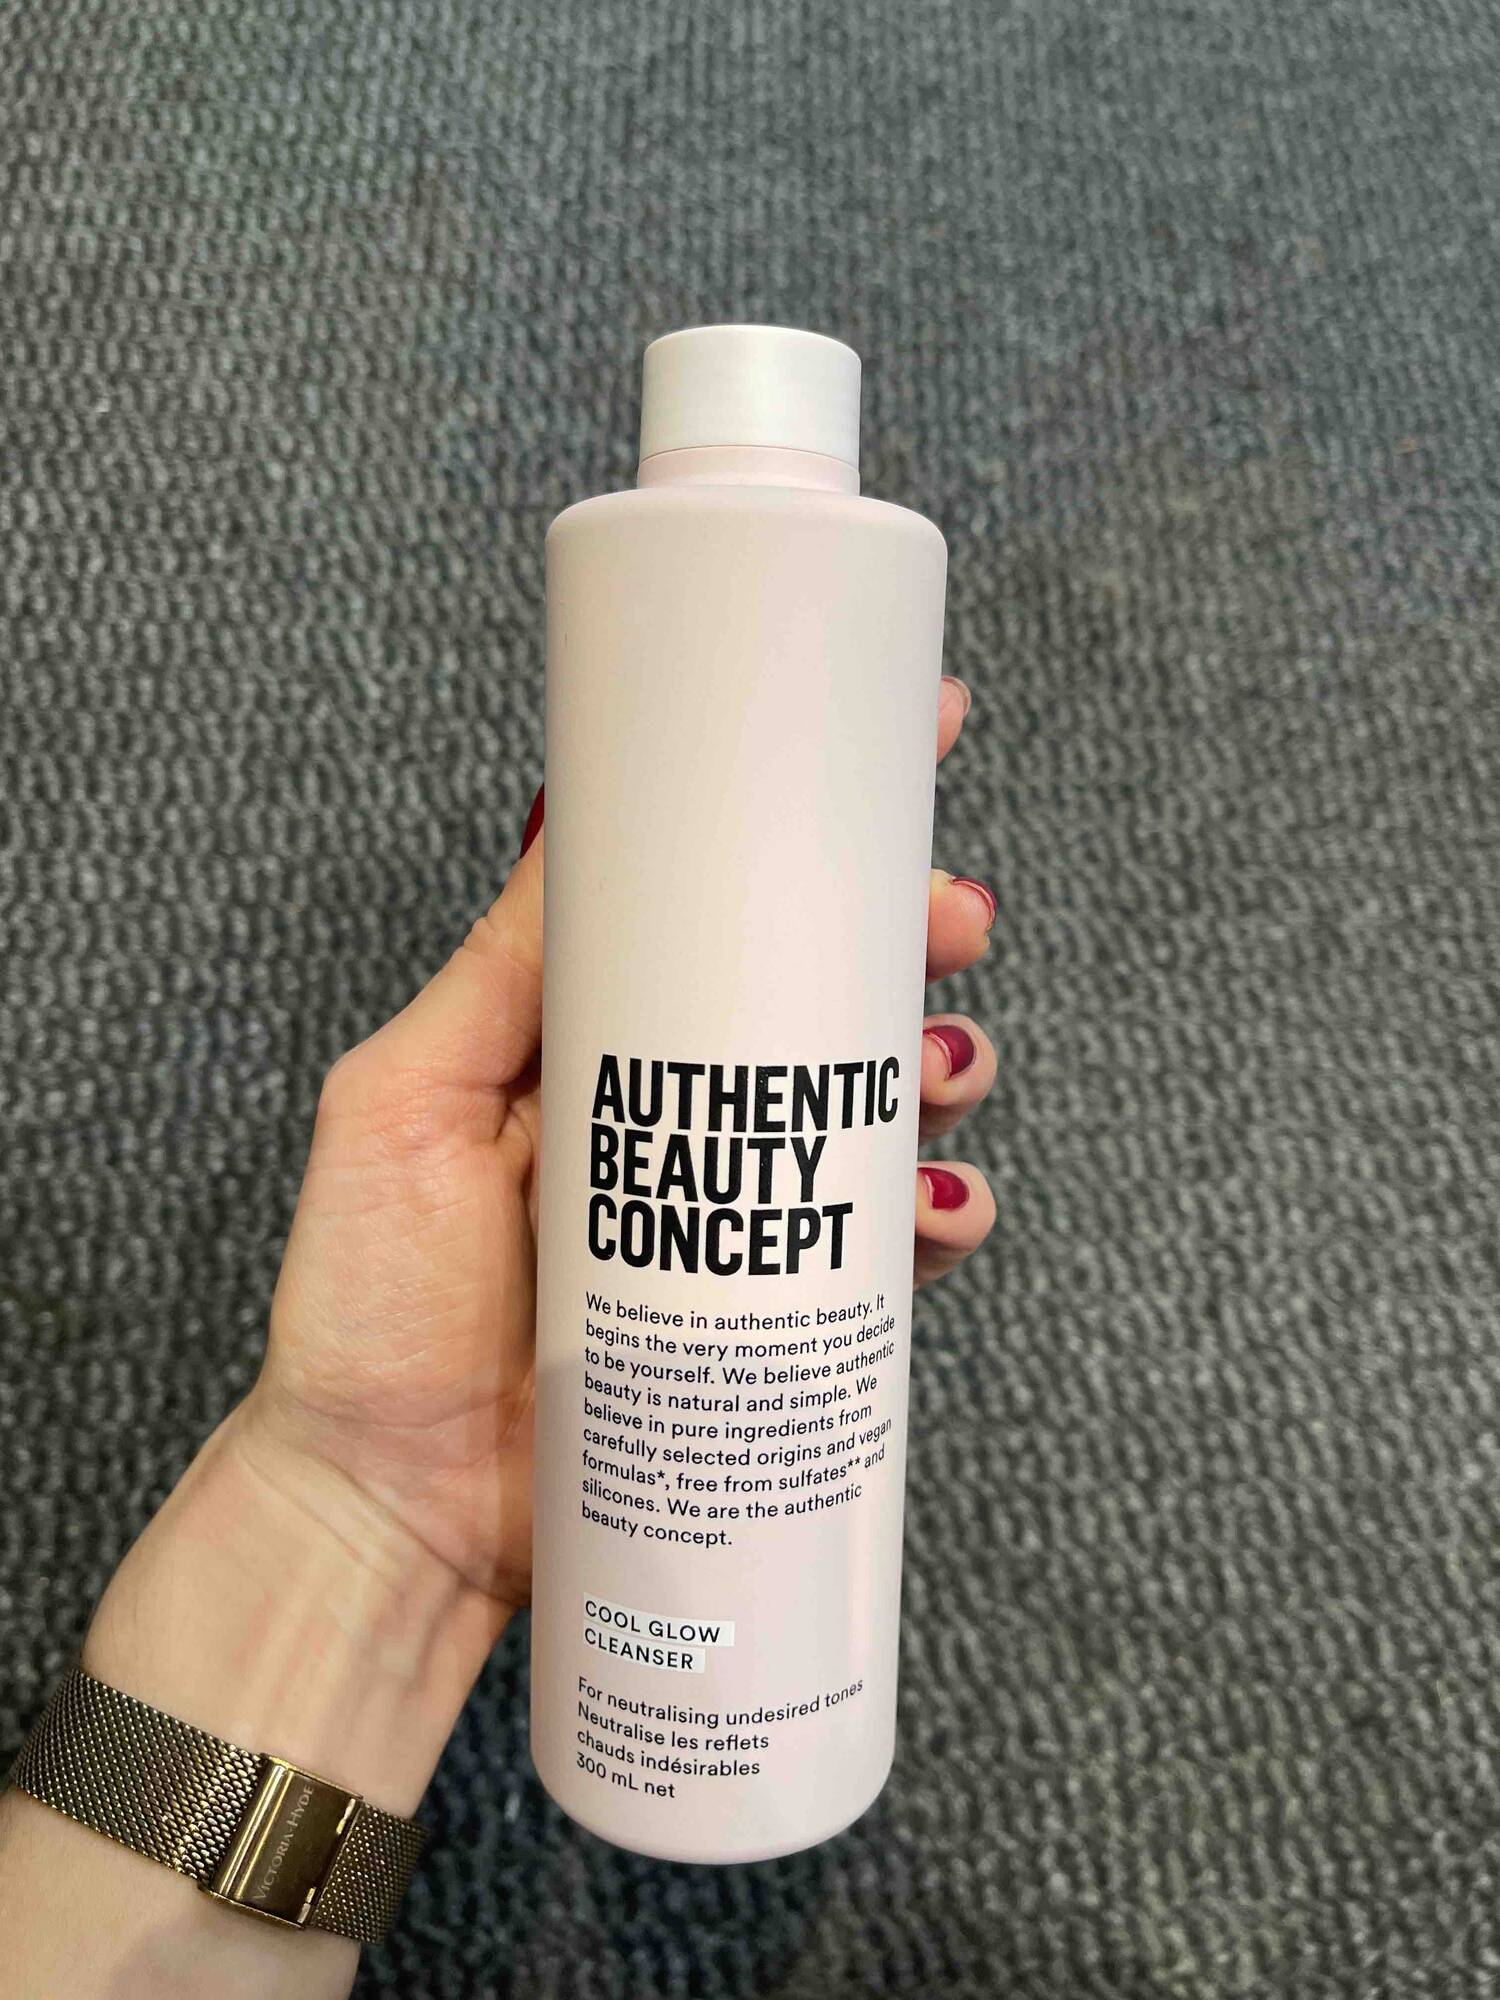 AUTHENTIC BEAUTY CONCEPT - Cool glow cleanser